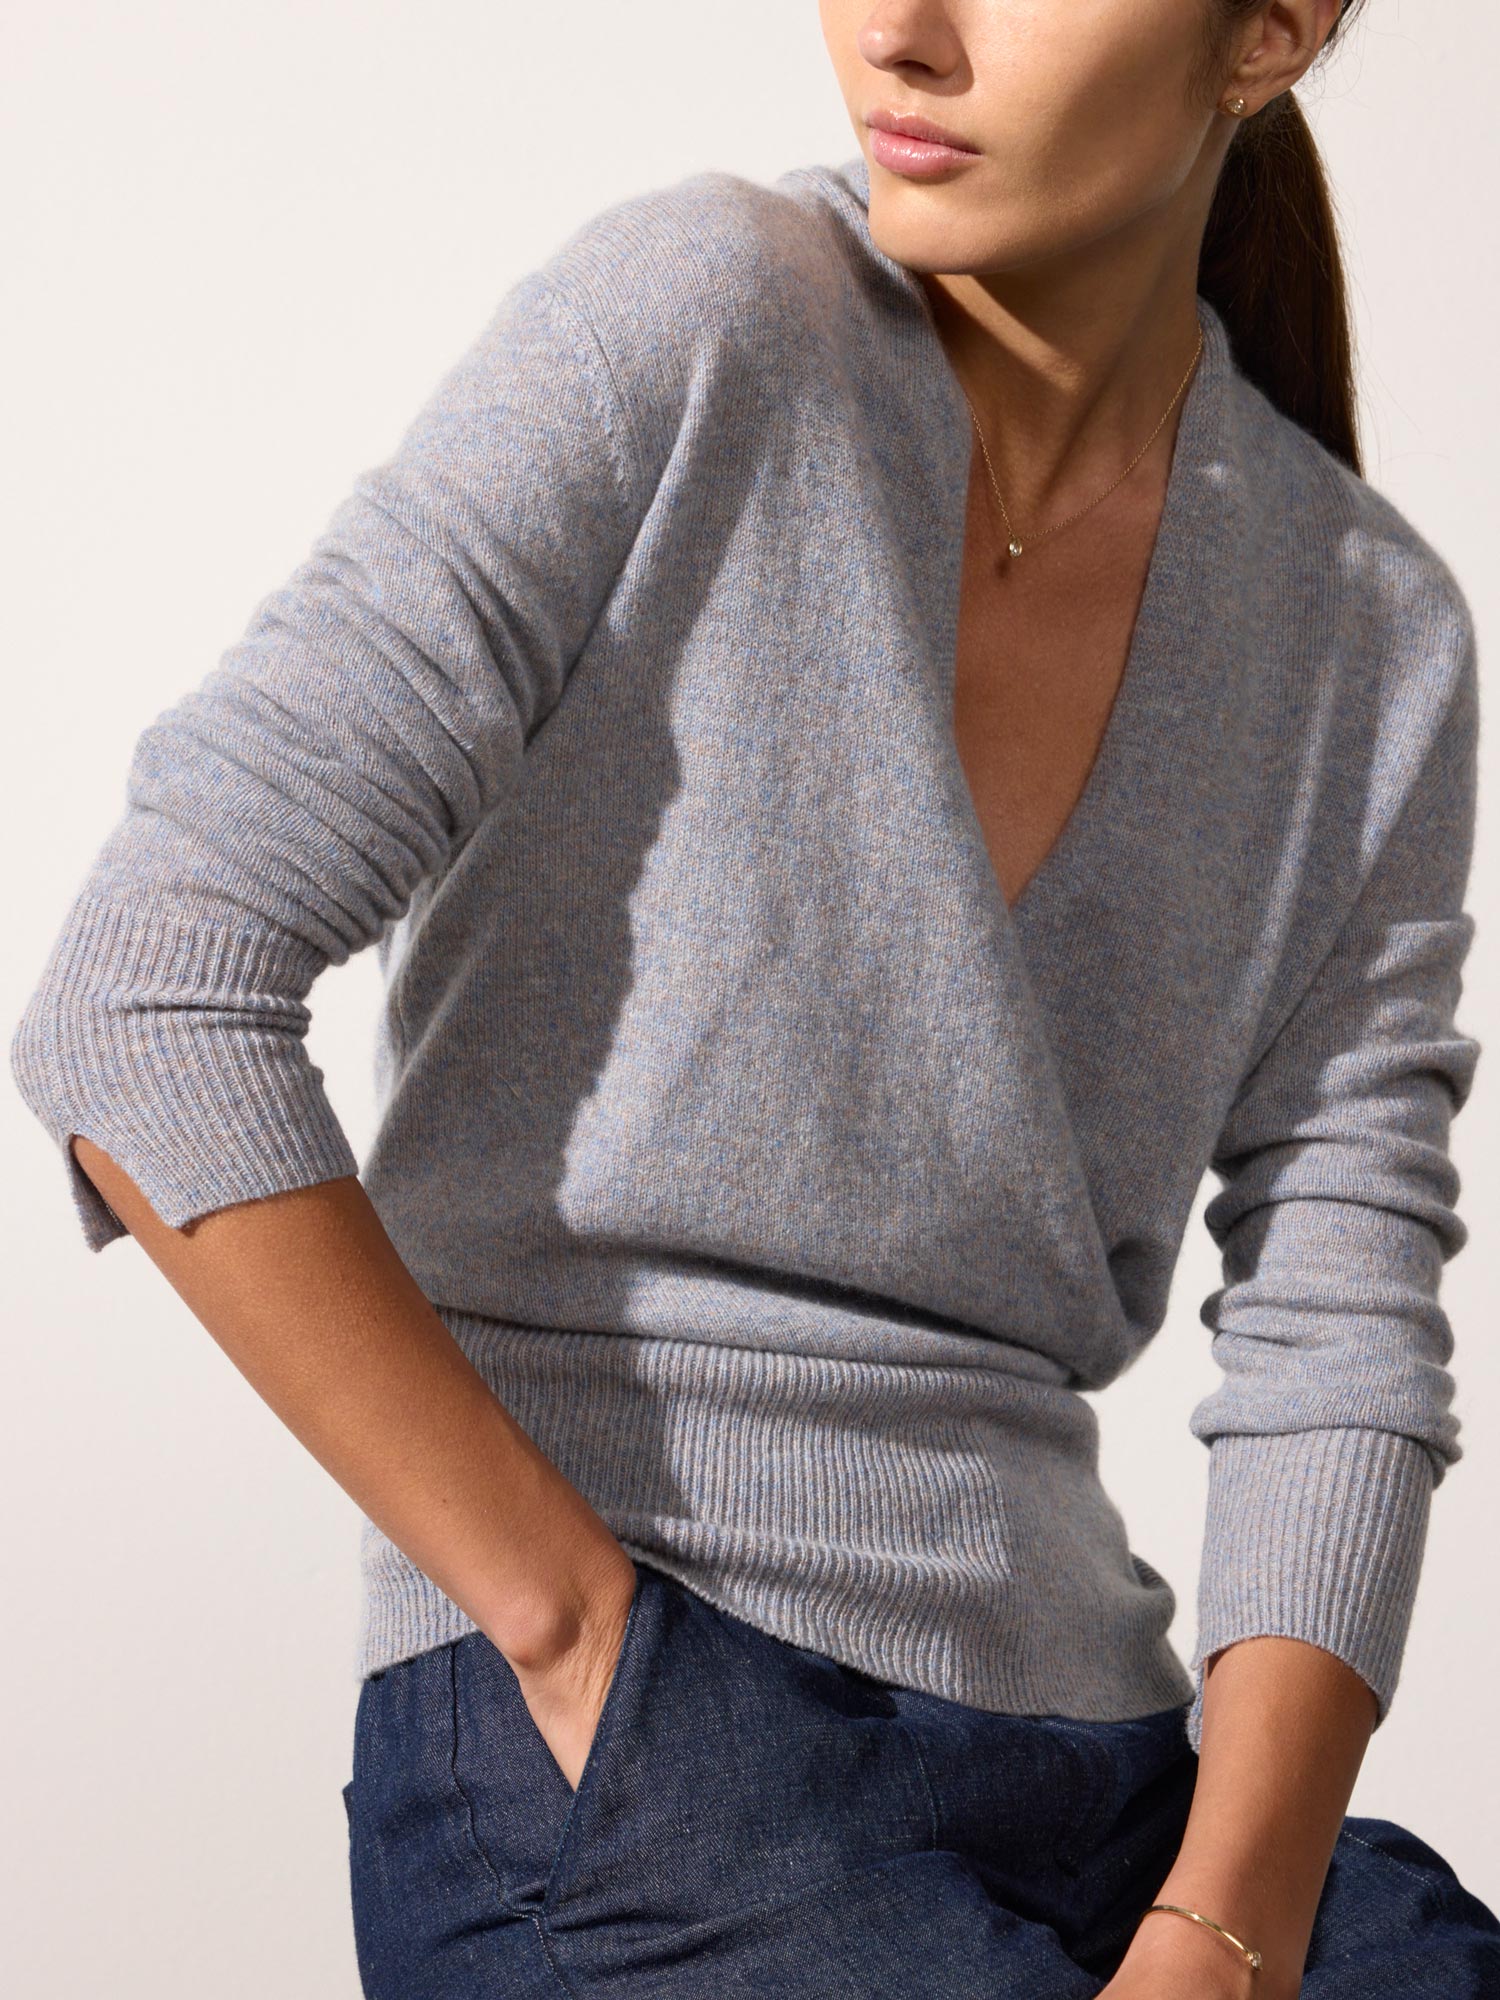 Phinneas cashmere v-neck blue wrap sweater front view